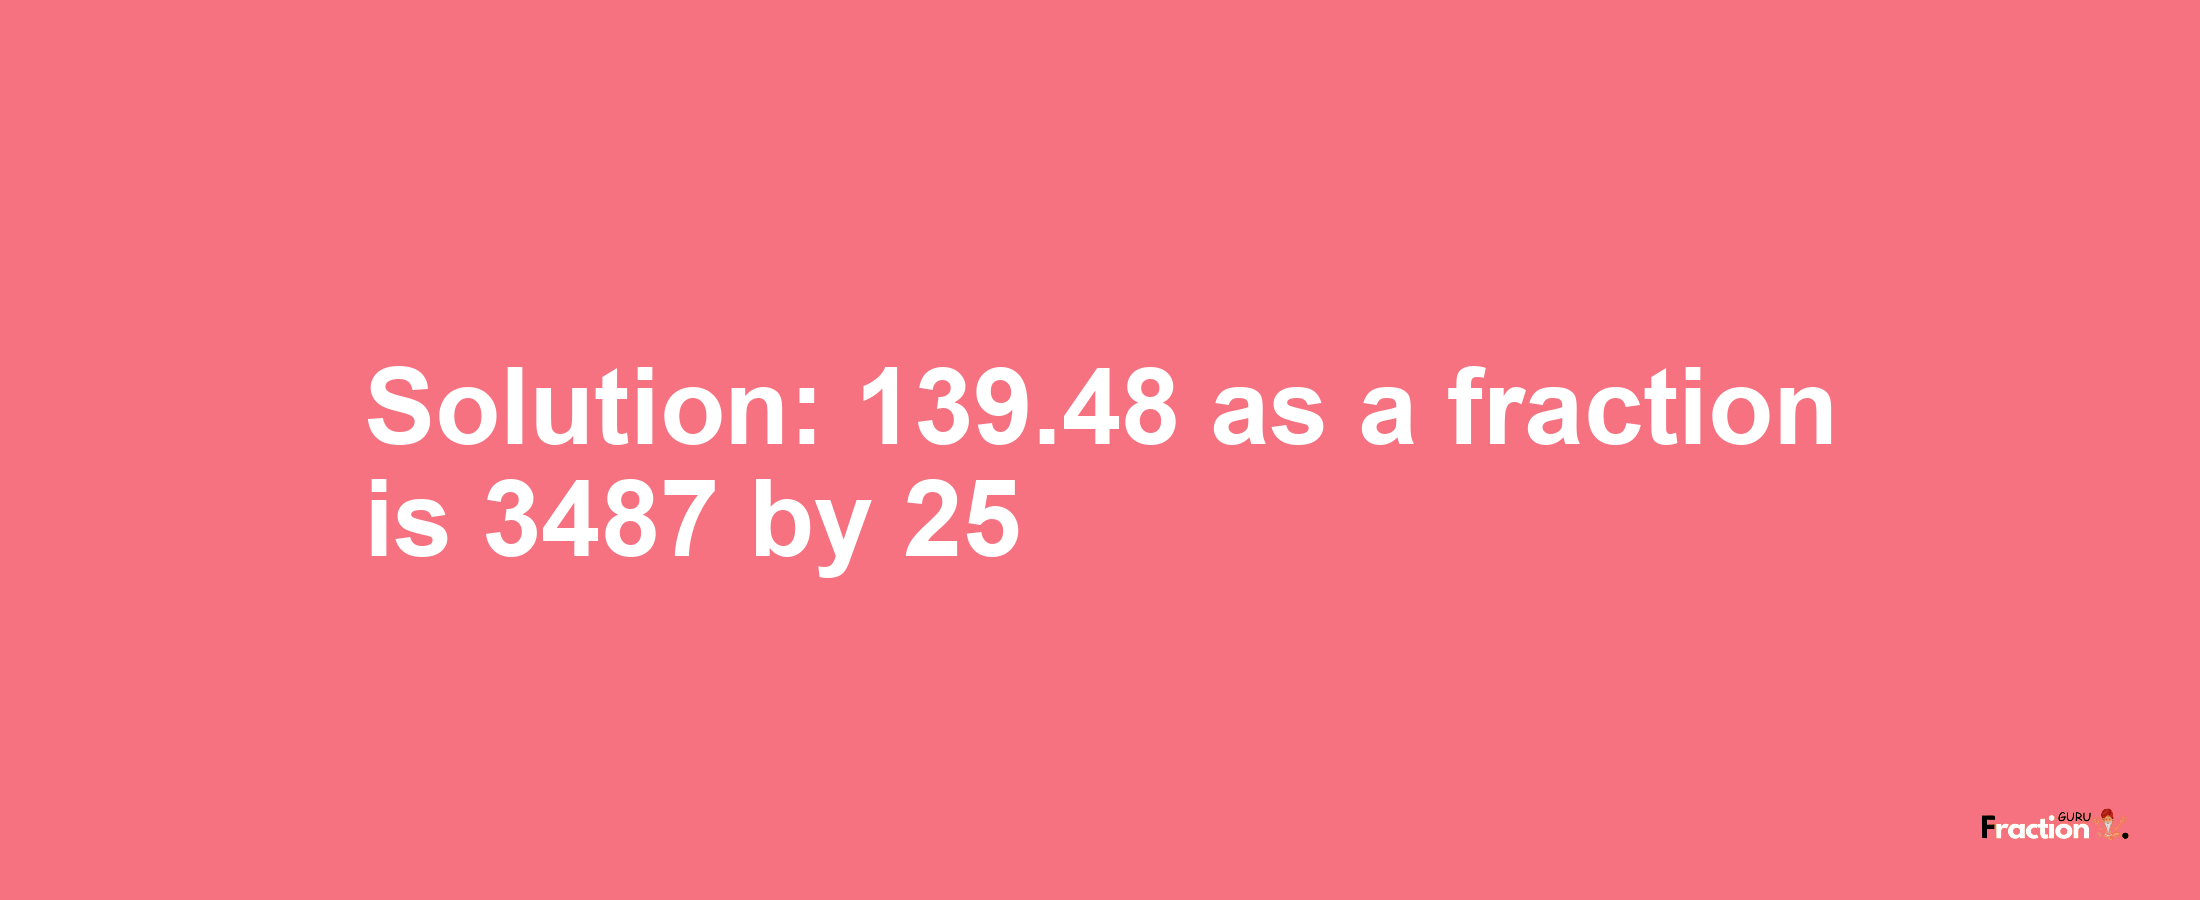 Solution:139.48 as a fraction is 3487/25